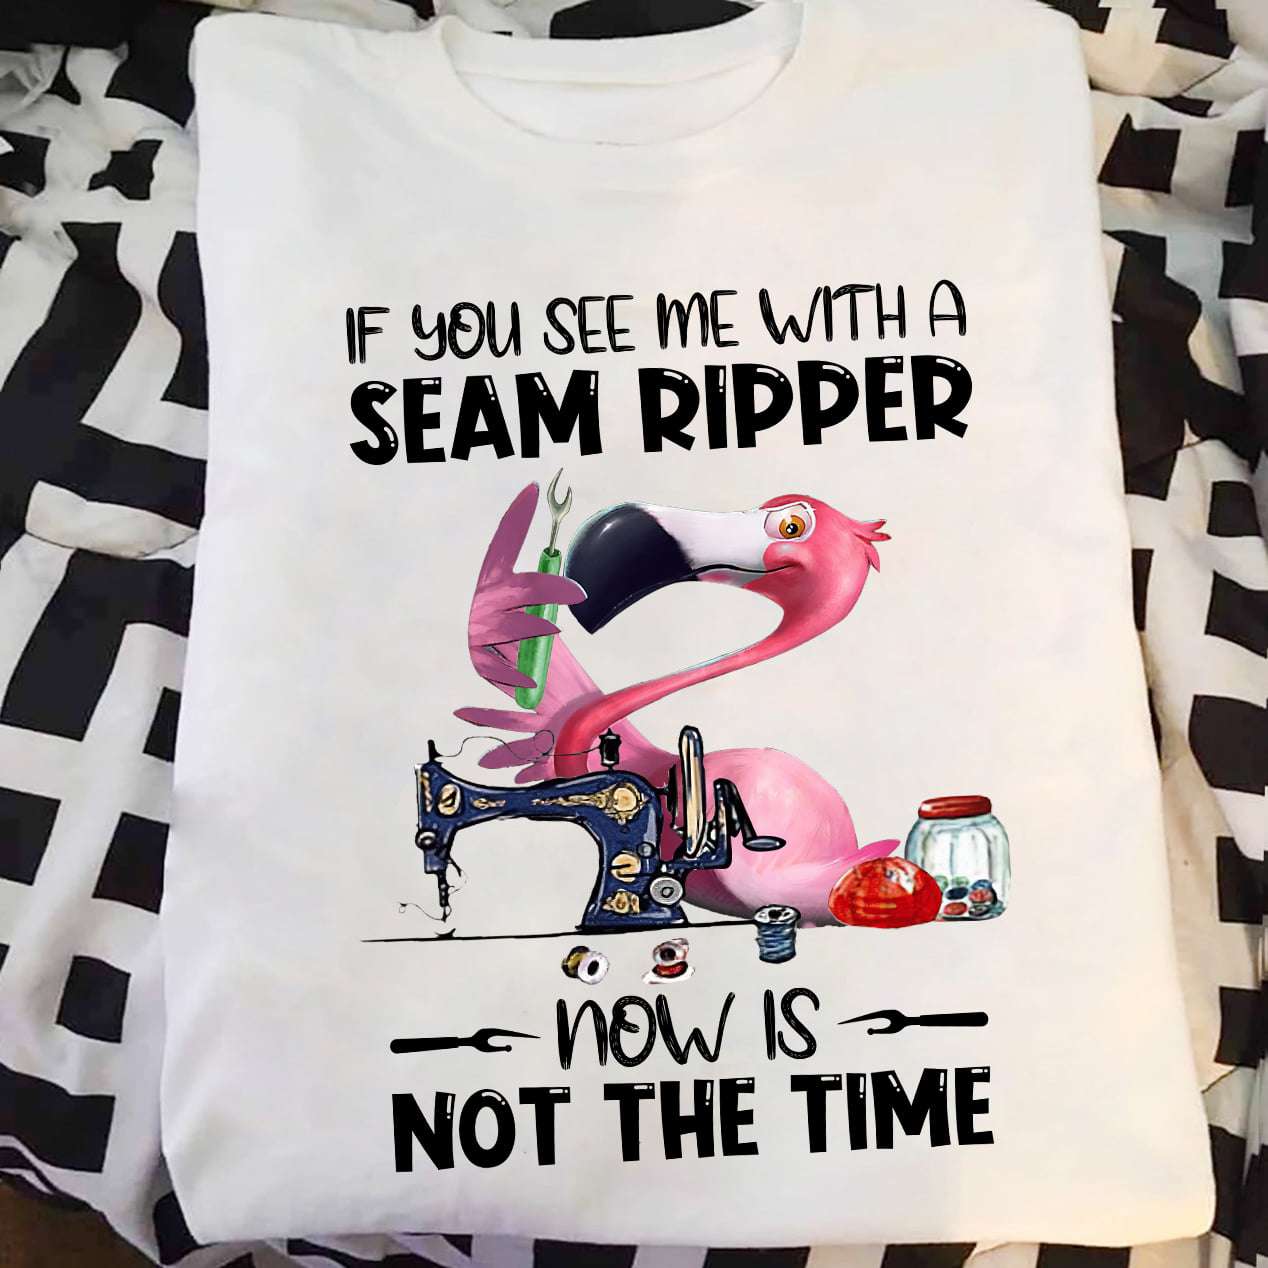 If you see me with a seam ripper now is not the time - Sewing machine, flamingo sewing lover